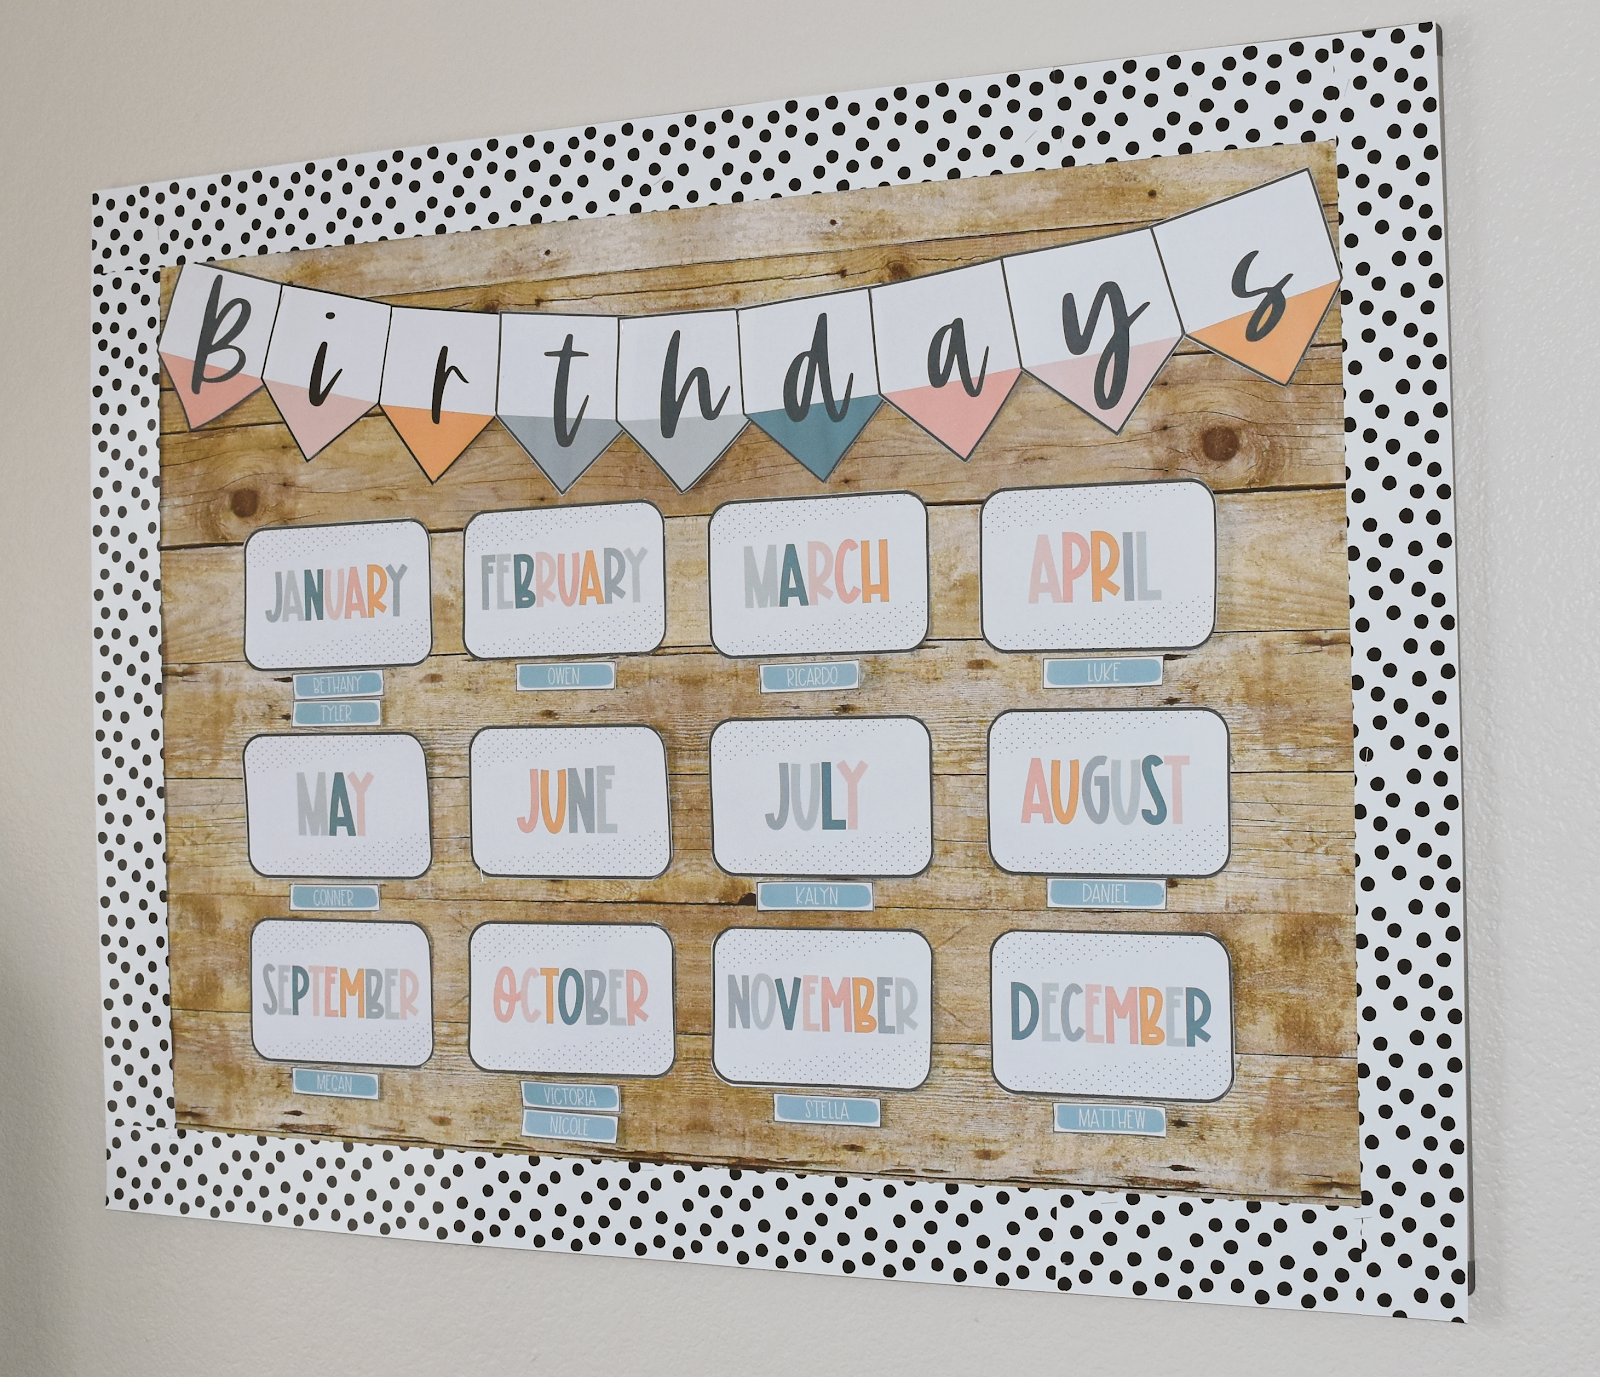 This image shows a bulletin board display with a heading reading "Birthdays". There is a card for each month of the year with smaller cards for student names underneath. The letters on the month cards are in calm colors. 